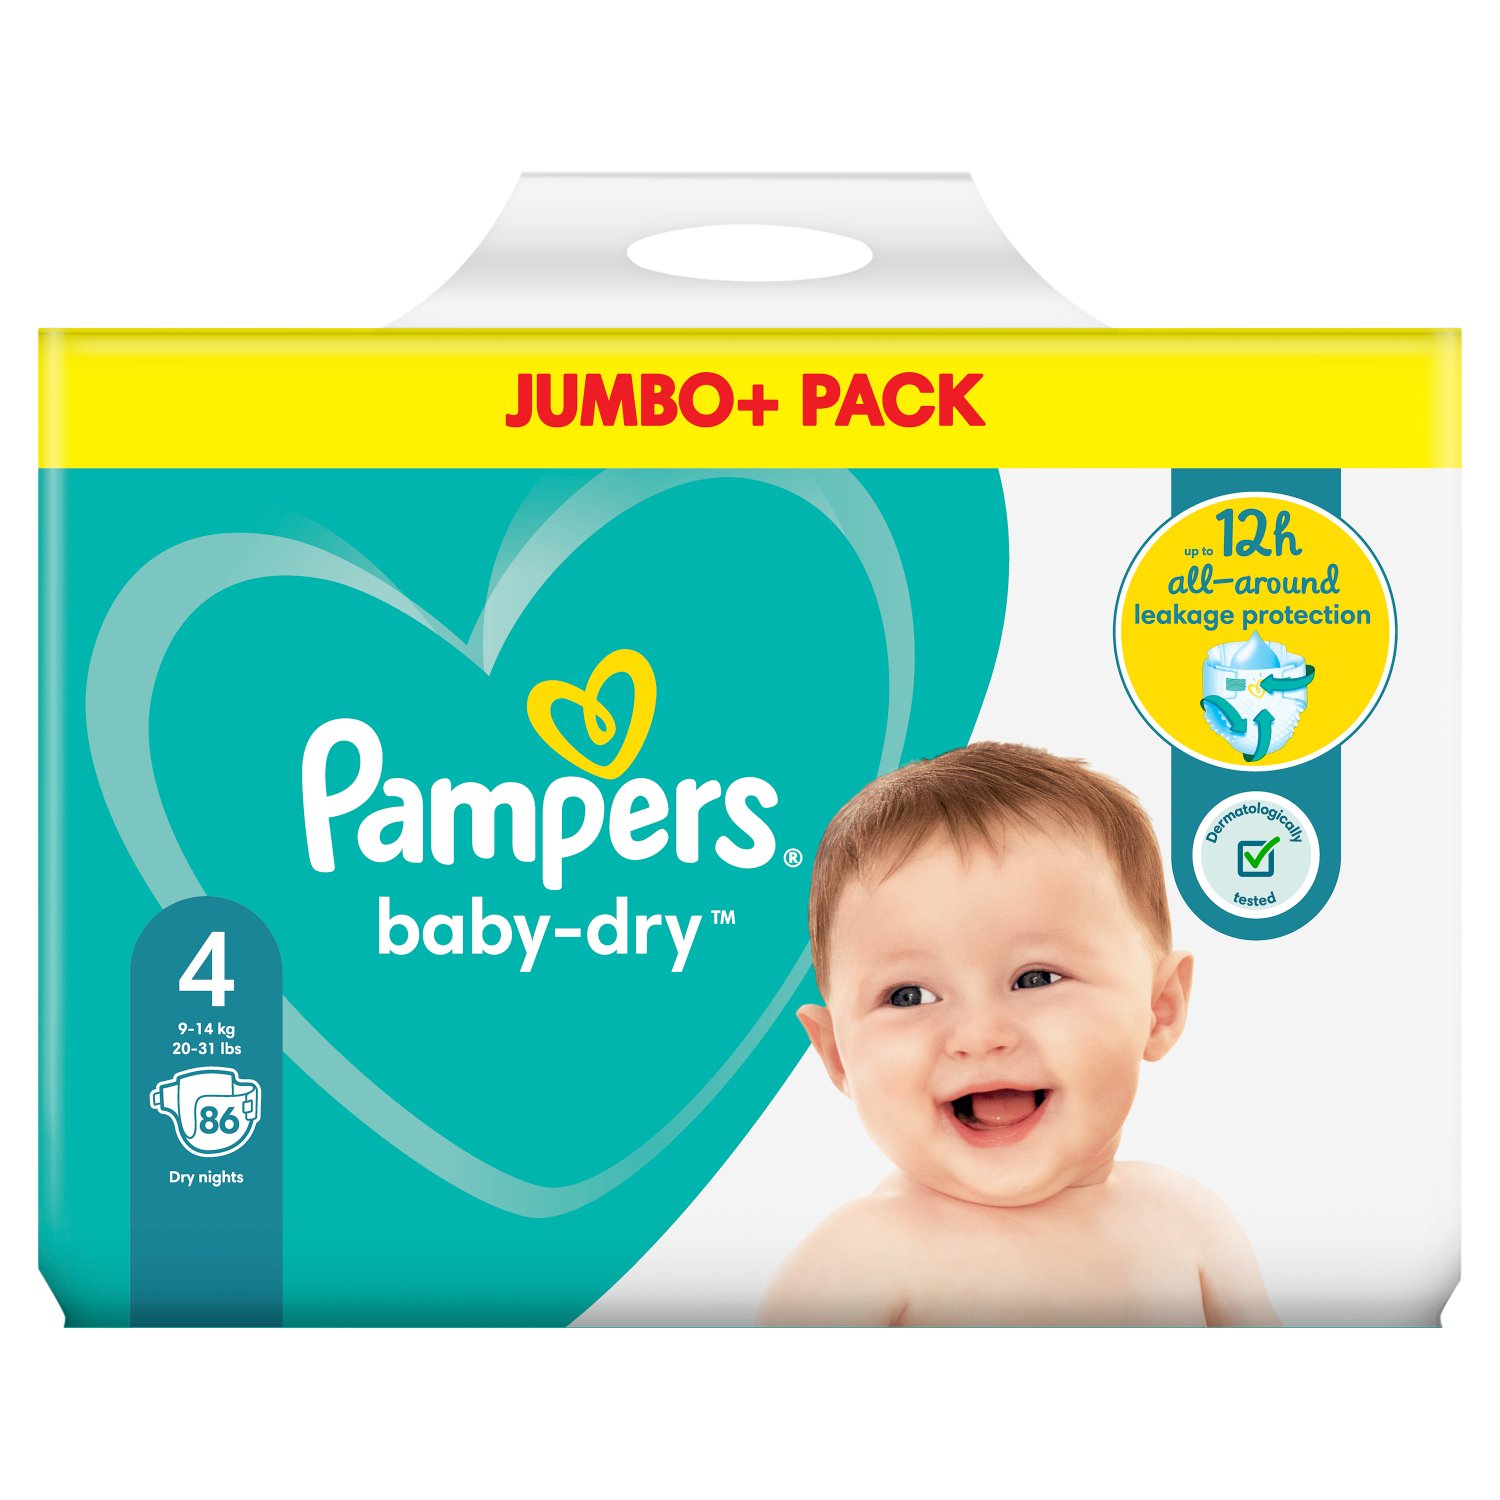 Pampers Baby-Dry Size 4 Nappies Jumbo+ Pack (86 Piece)